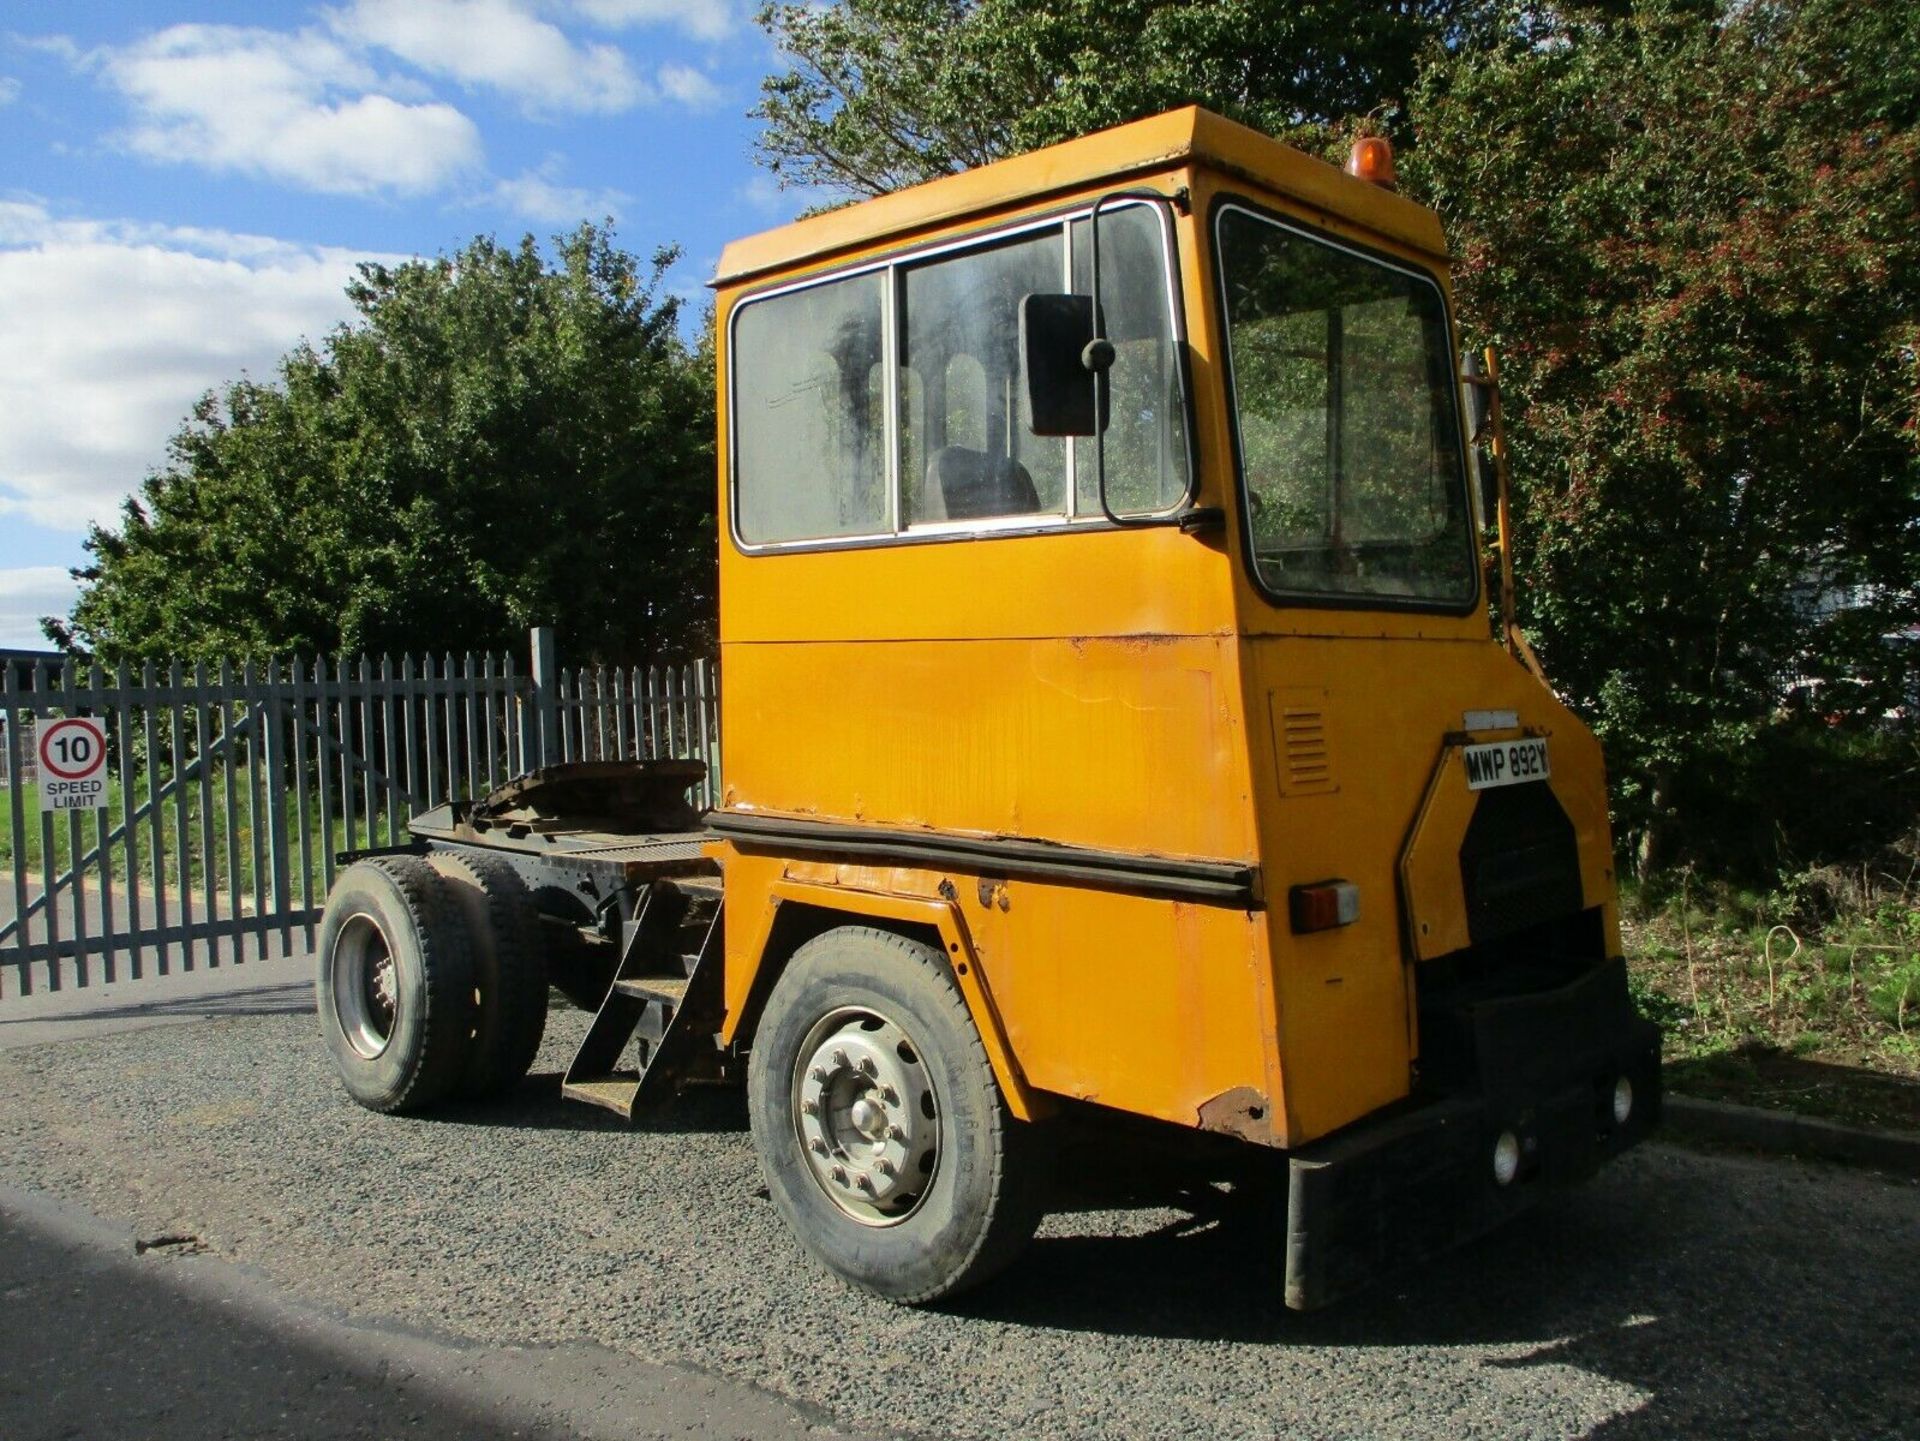 Reliance Dock spotter shunter tow tug tractor unit - Image 2 of 11